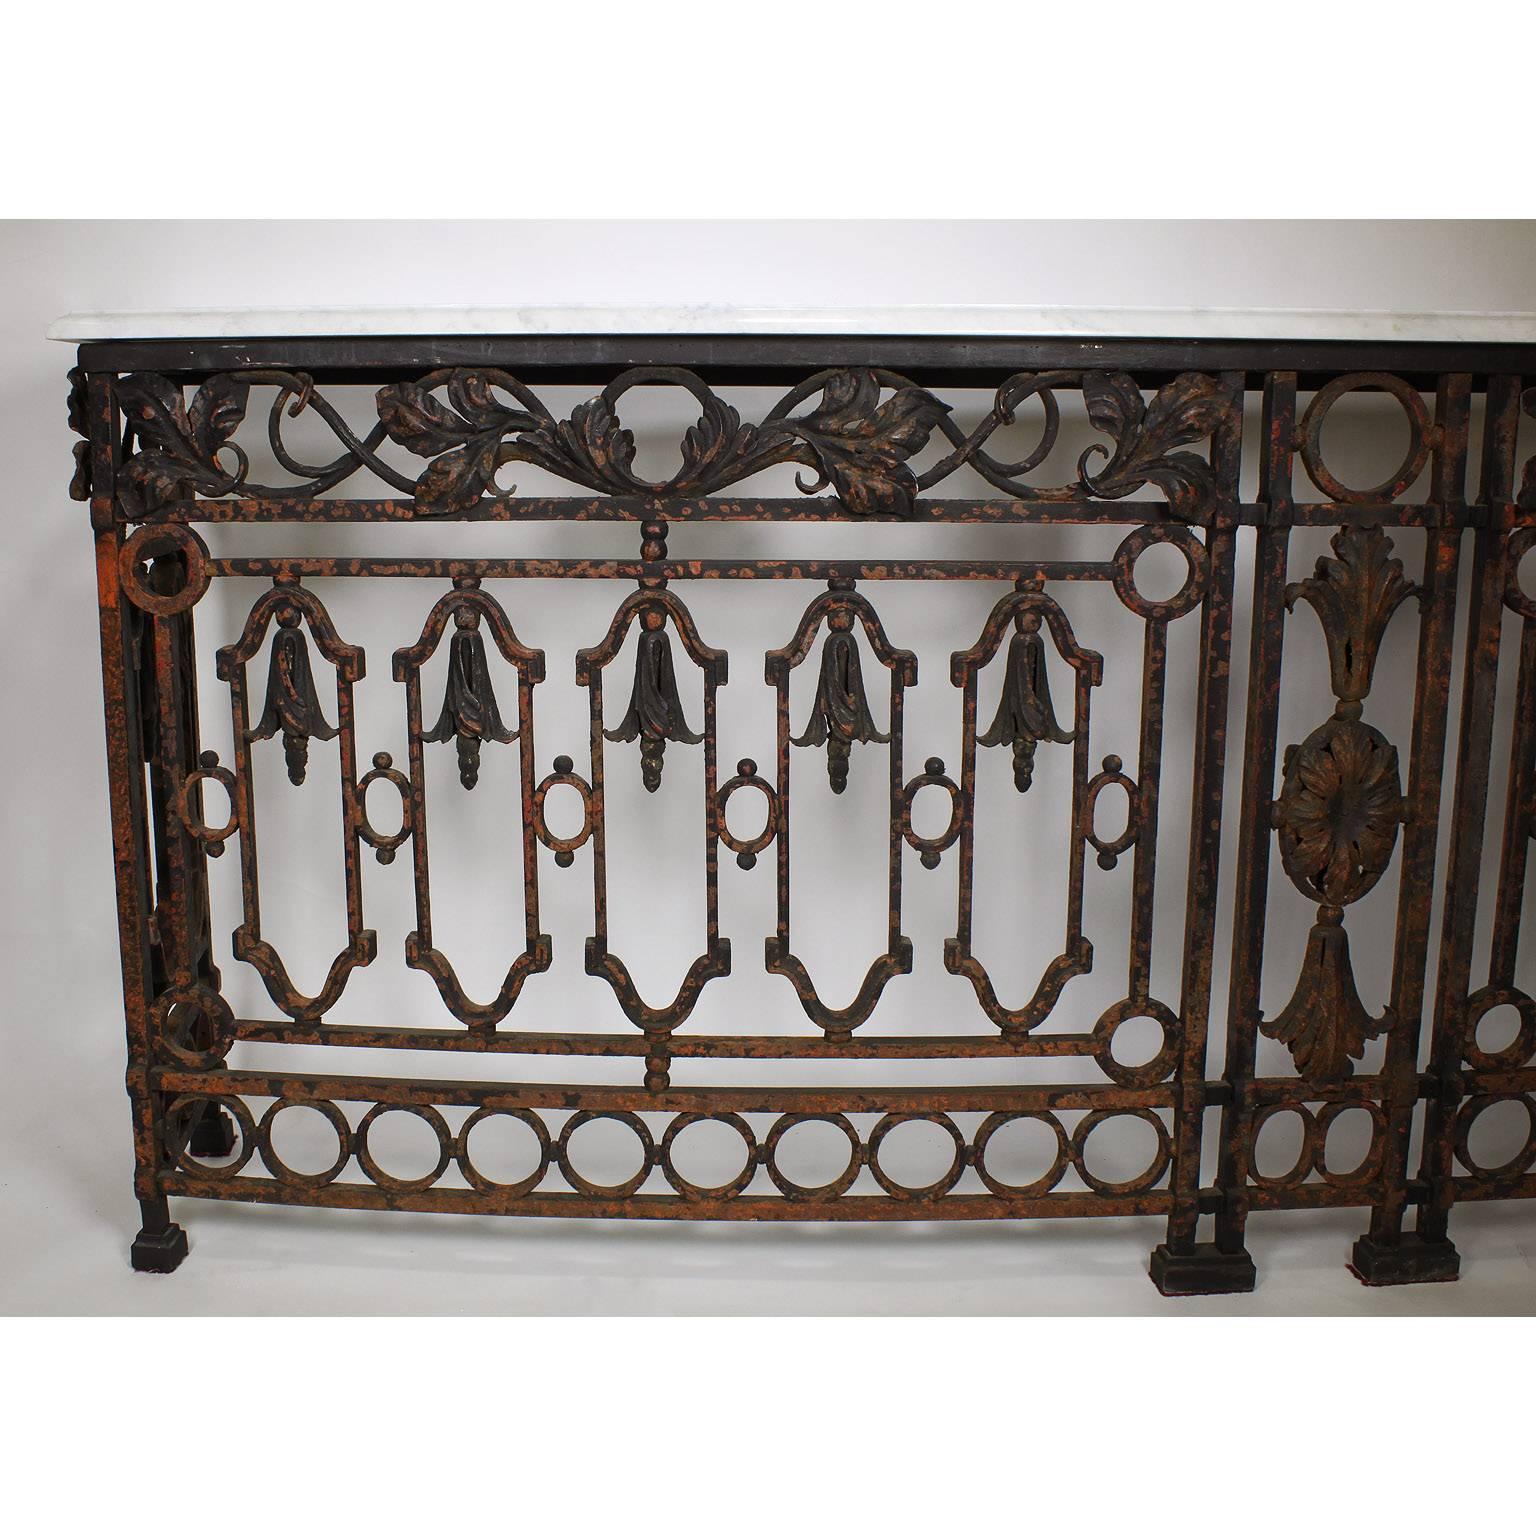 A Large Pair of French 19th Century Baroque Style Free-Standing Serpentine Wrought Iron Wall Console Tables with marble top. The slender bowed wrought iron bodies surmounted with leaf and flower ornaments on an architectural frame with a black paint